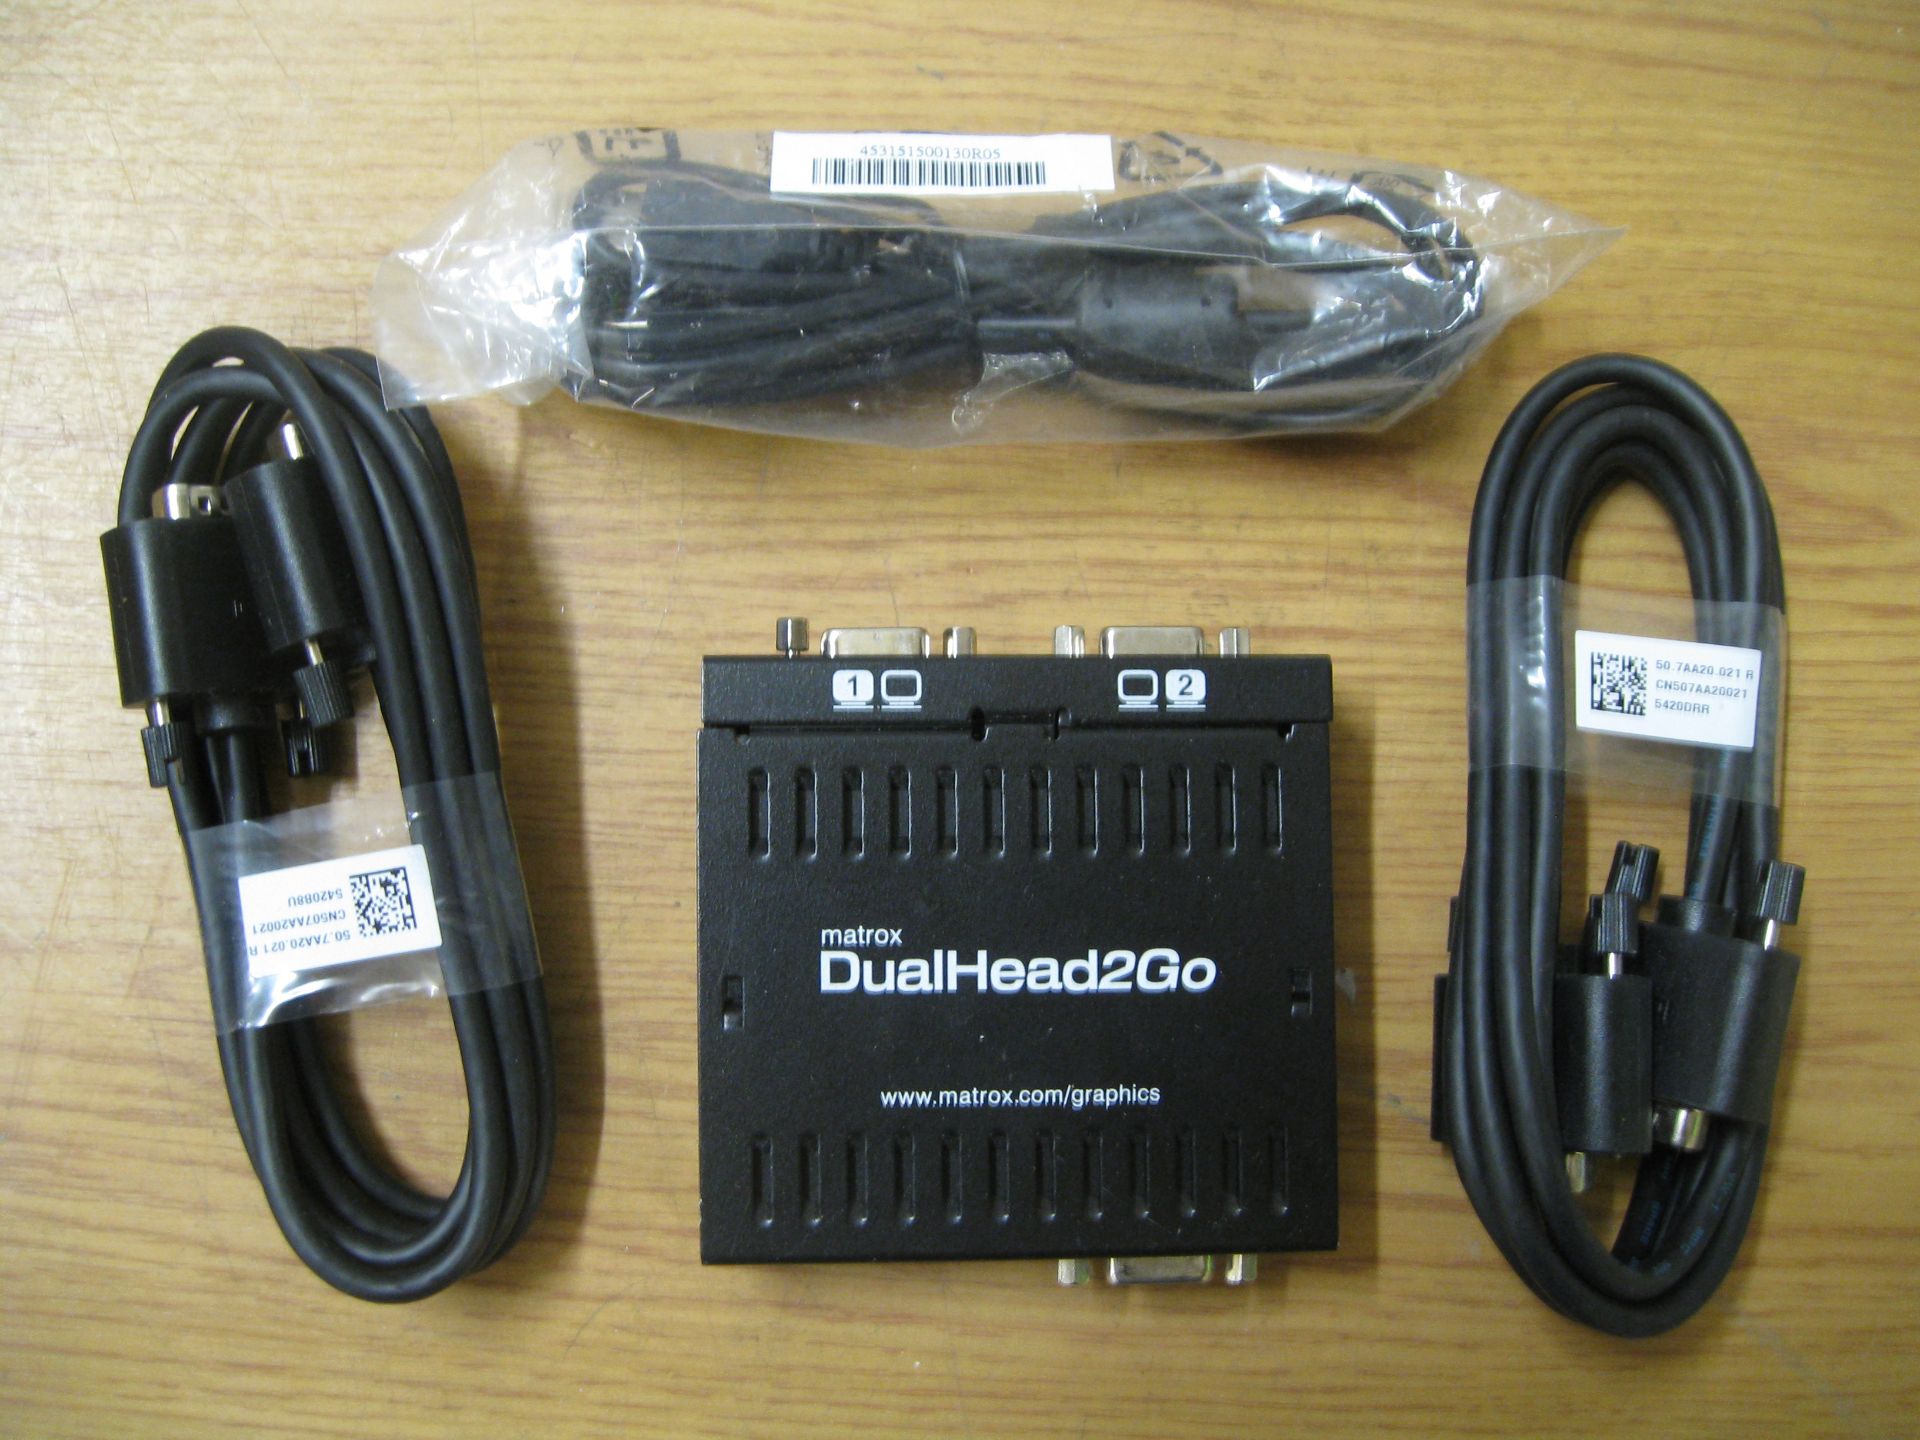 Matrox Dual Head 2 Go D2G-A2A-IF Dual VGA USB Display Adapter. Complete with 2 x VGA cables & USB